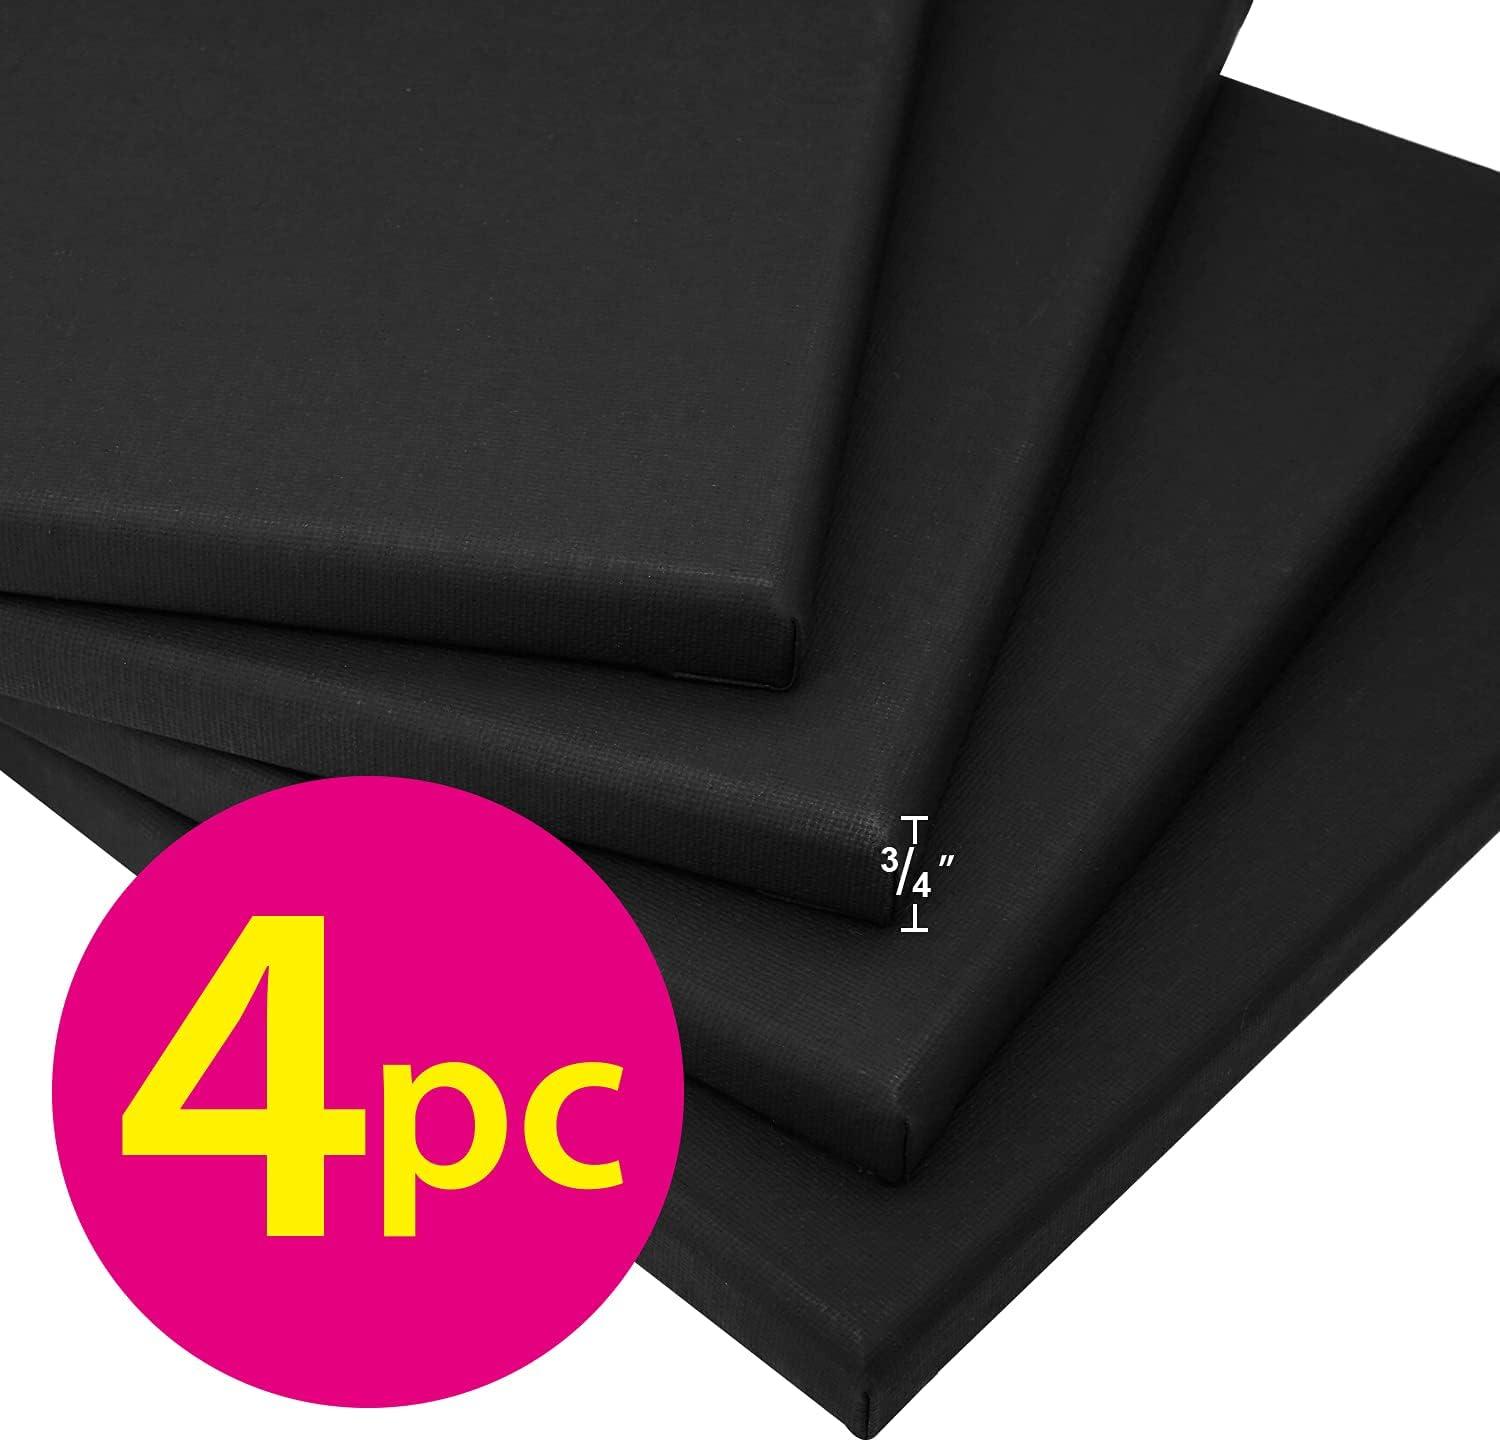 Canvas Boards for Painting  8x10 / 10 Pack - 5/8 Inch Profile 100